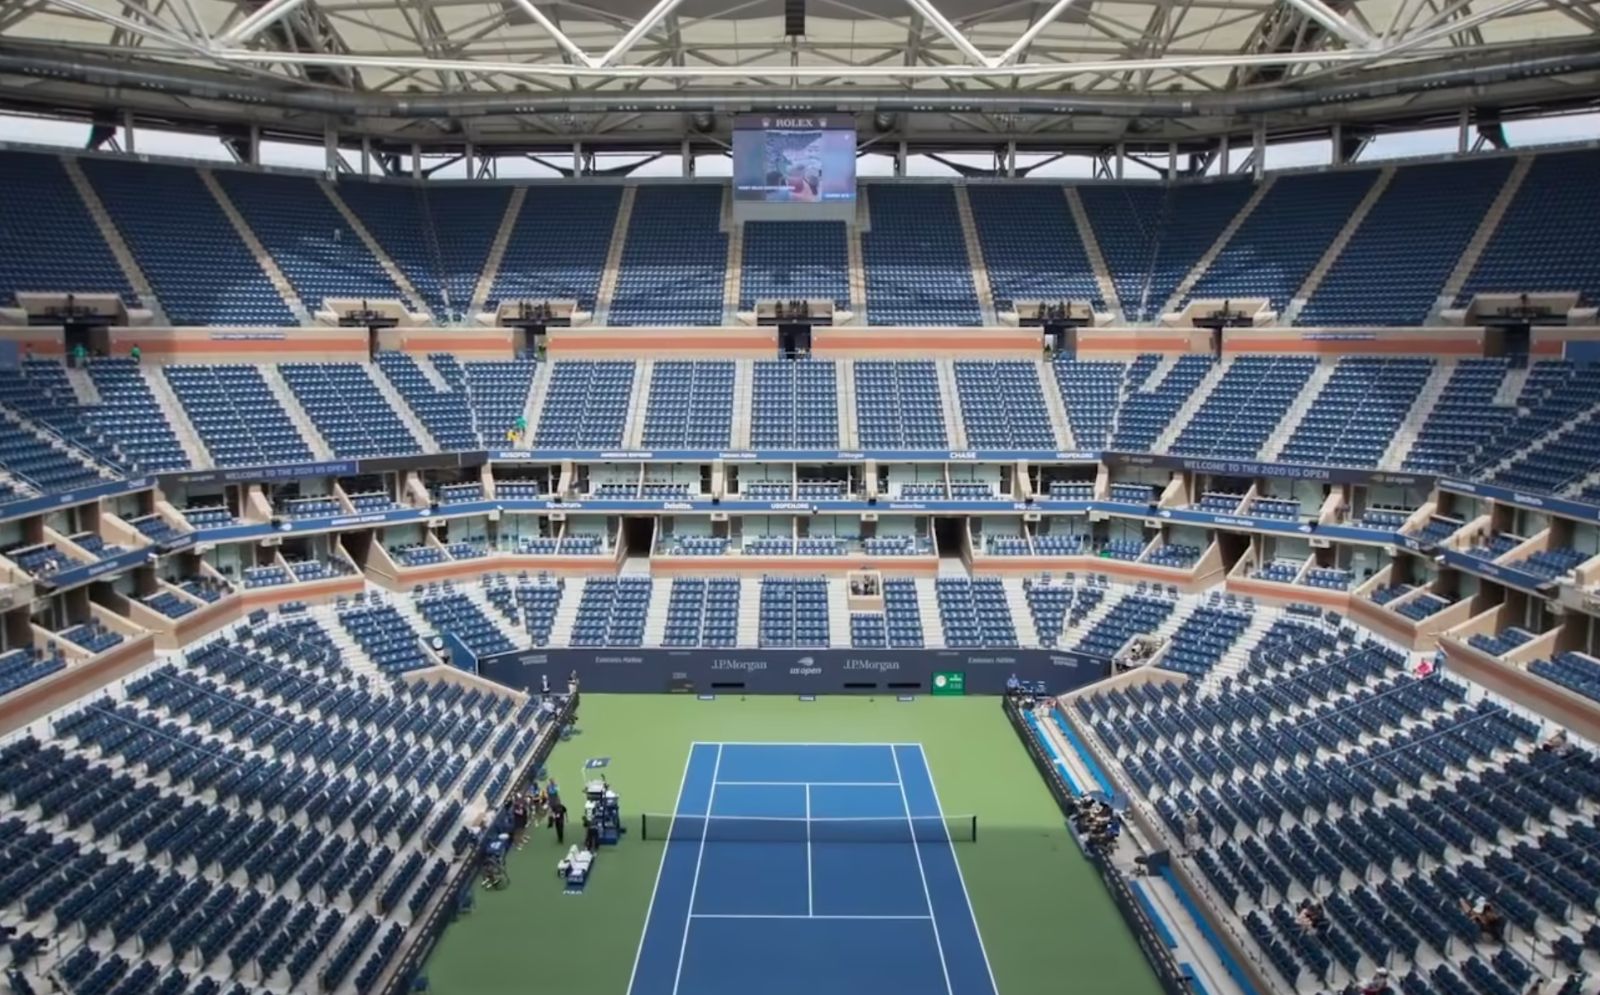 US Open 2020 - Making the Sound